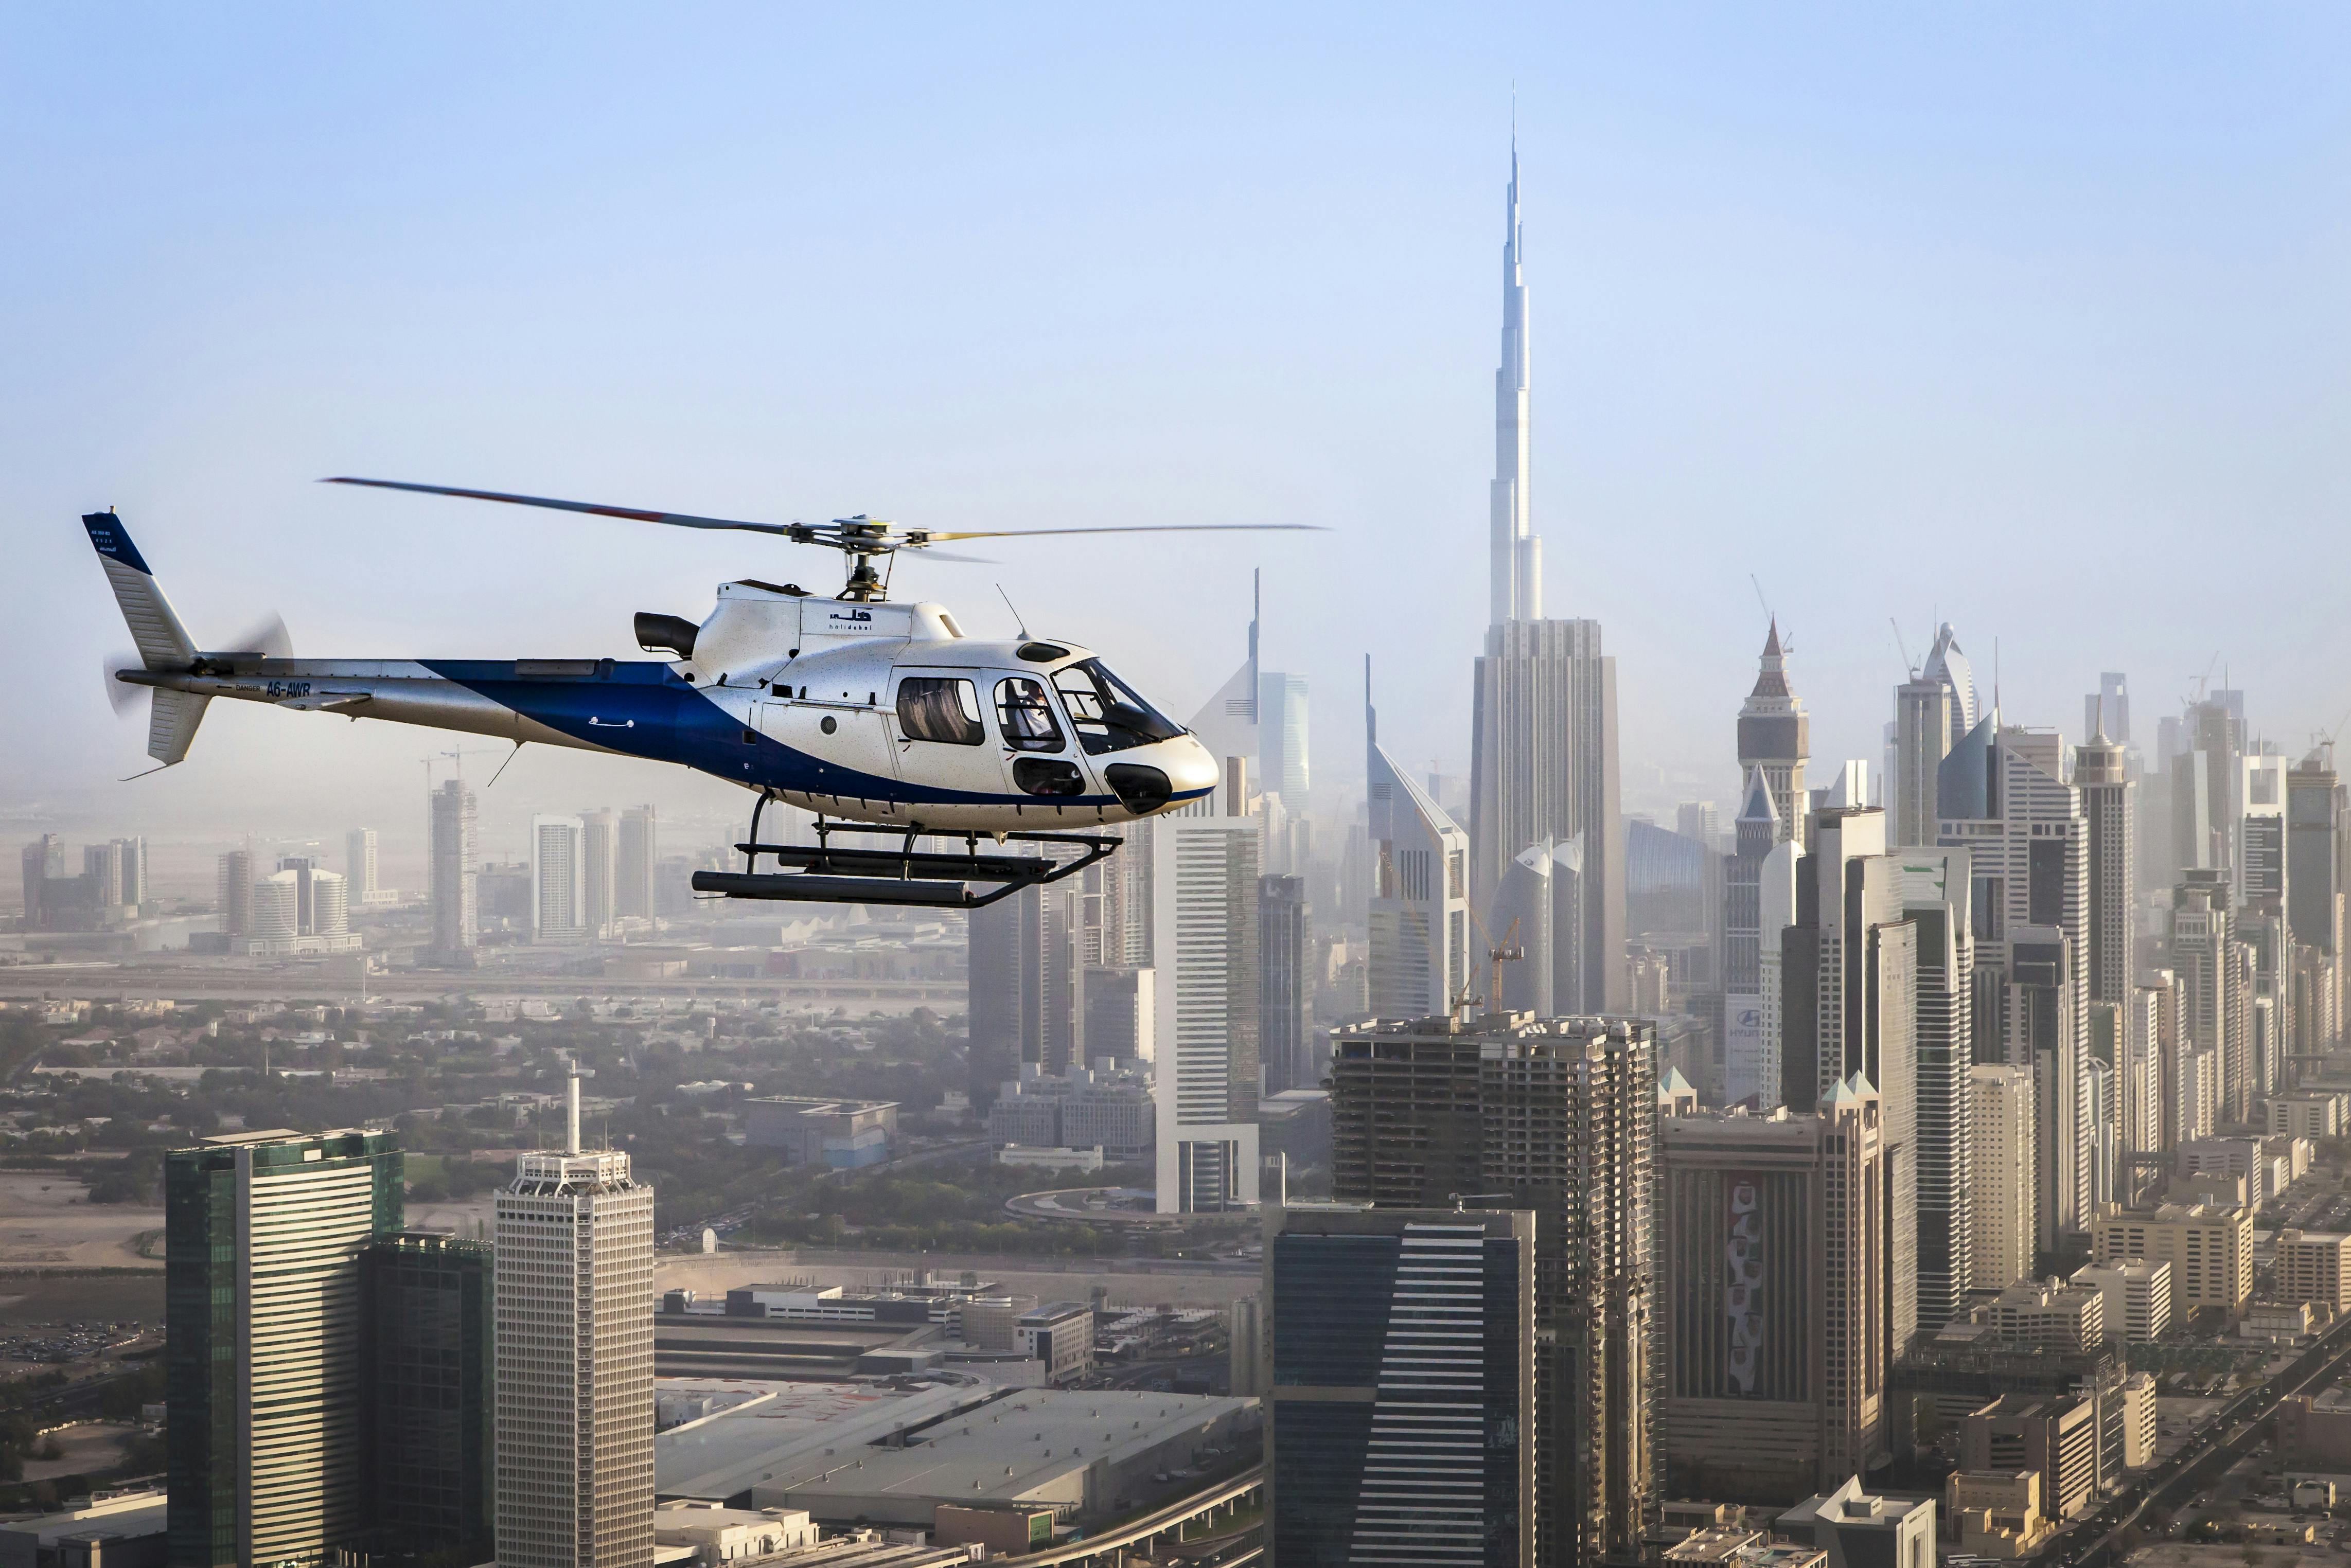 12-minute helicopter tour over Dubai